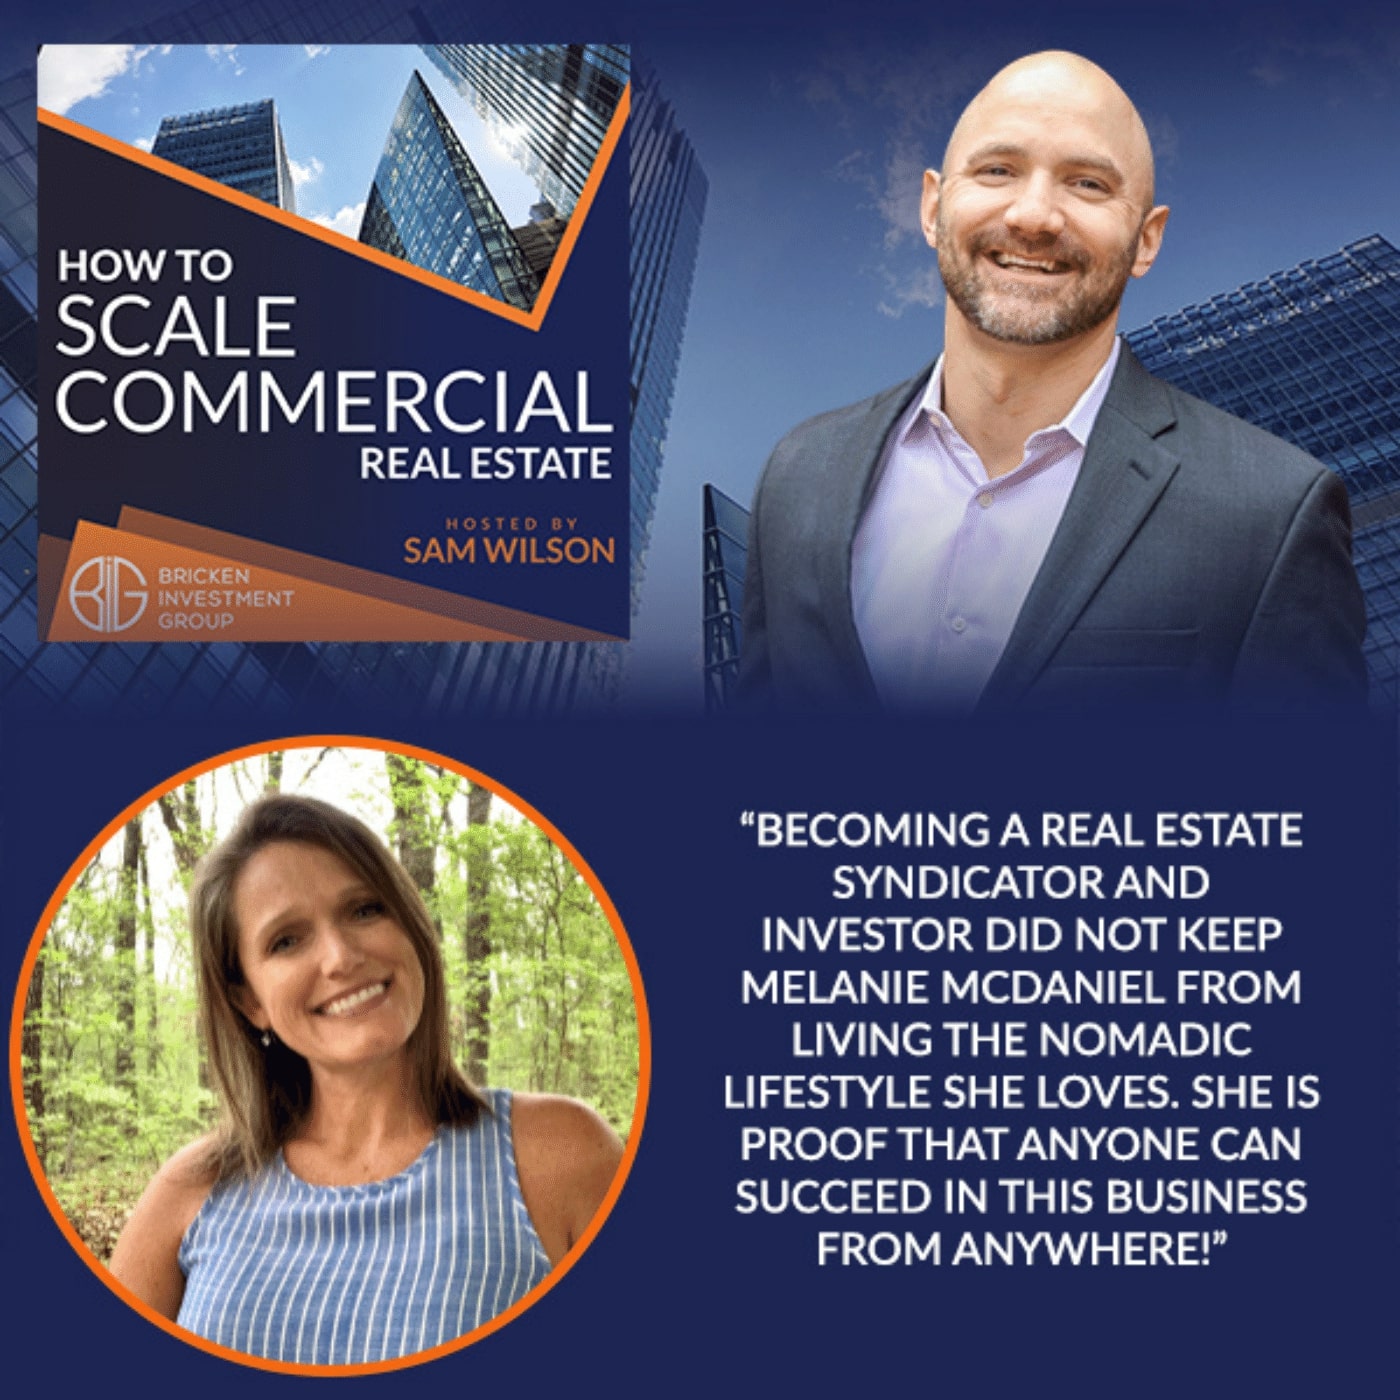 How to Scale Commercial Real Estate